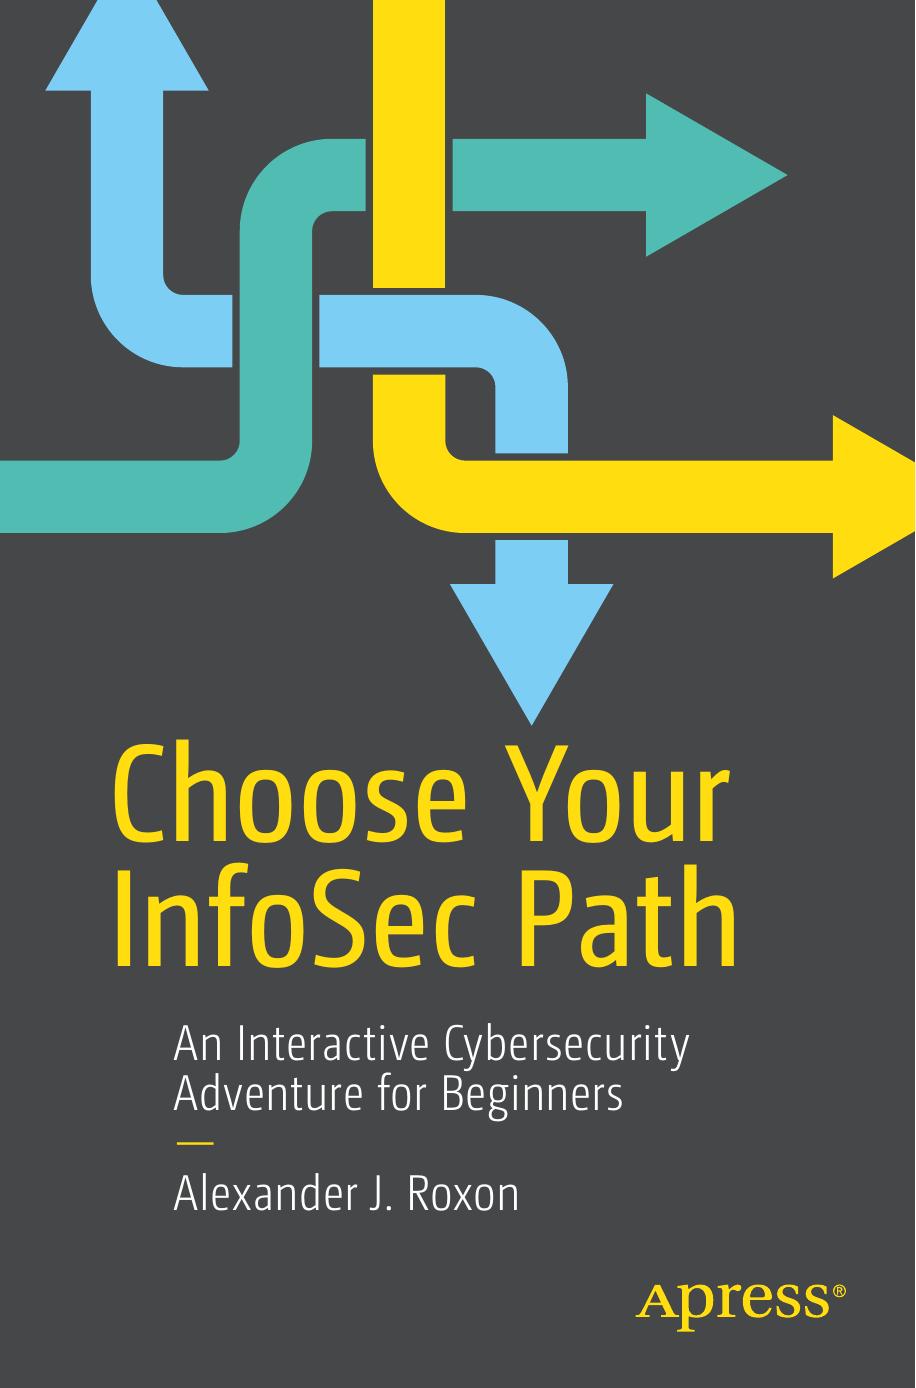 Choose Your InfoSec Path: An Interactive Cybersecurity Adventure for Beginners by Alexander J. Roxon